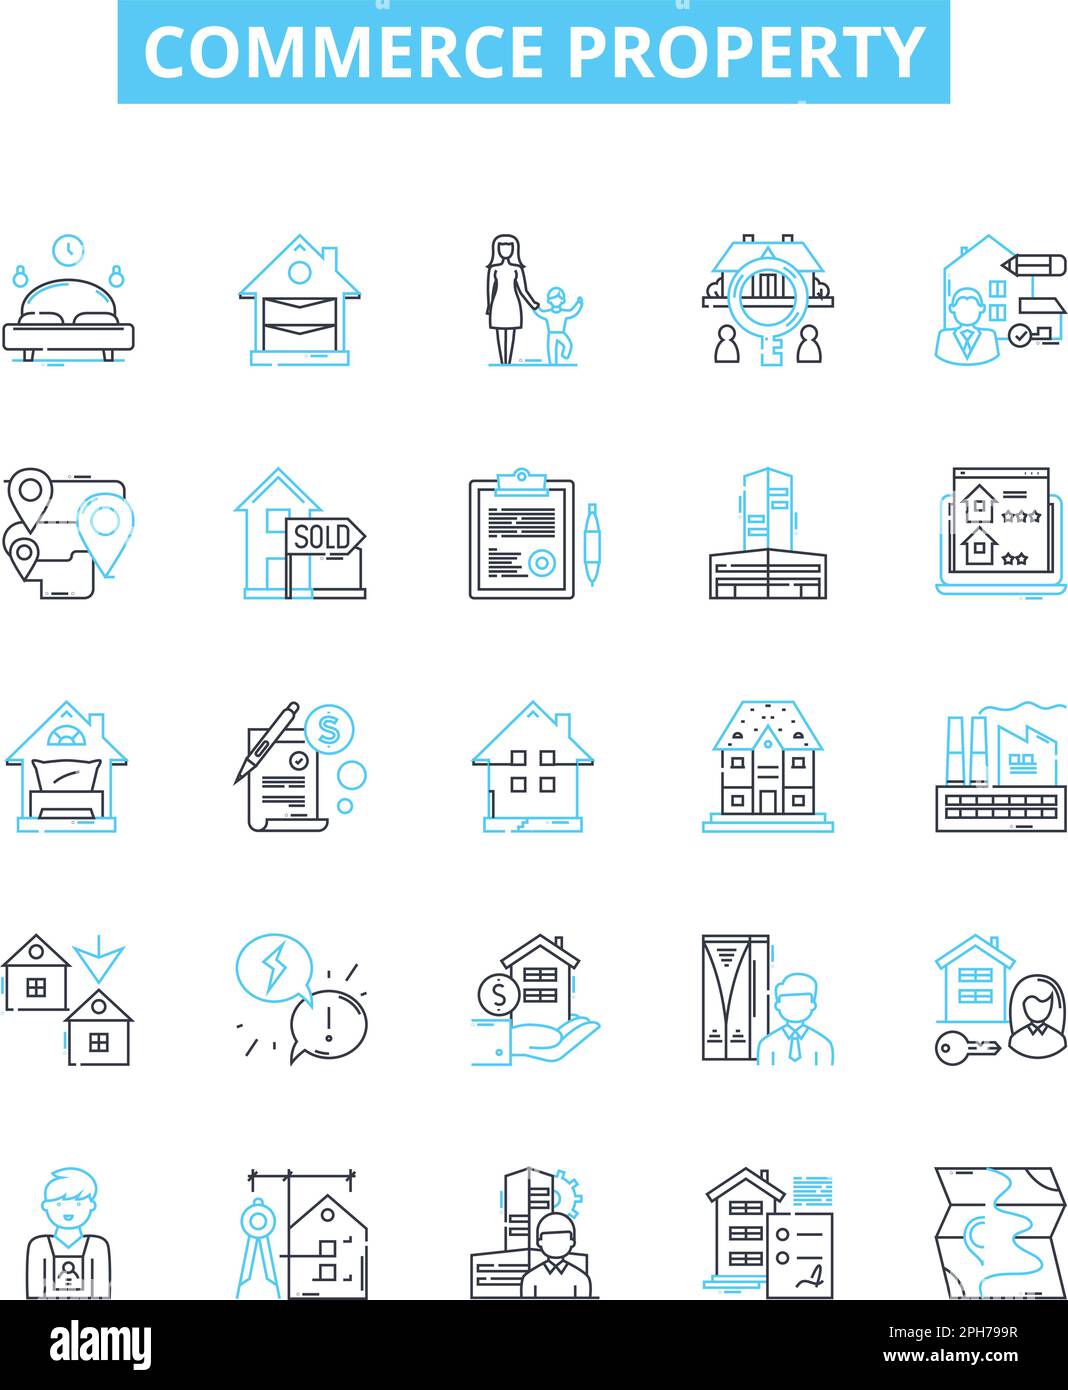 Commerce property vector line icons set. Commerce, Property, Real ...